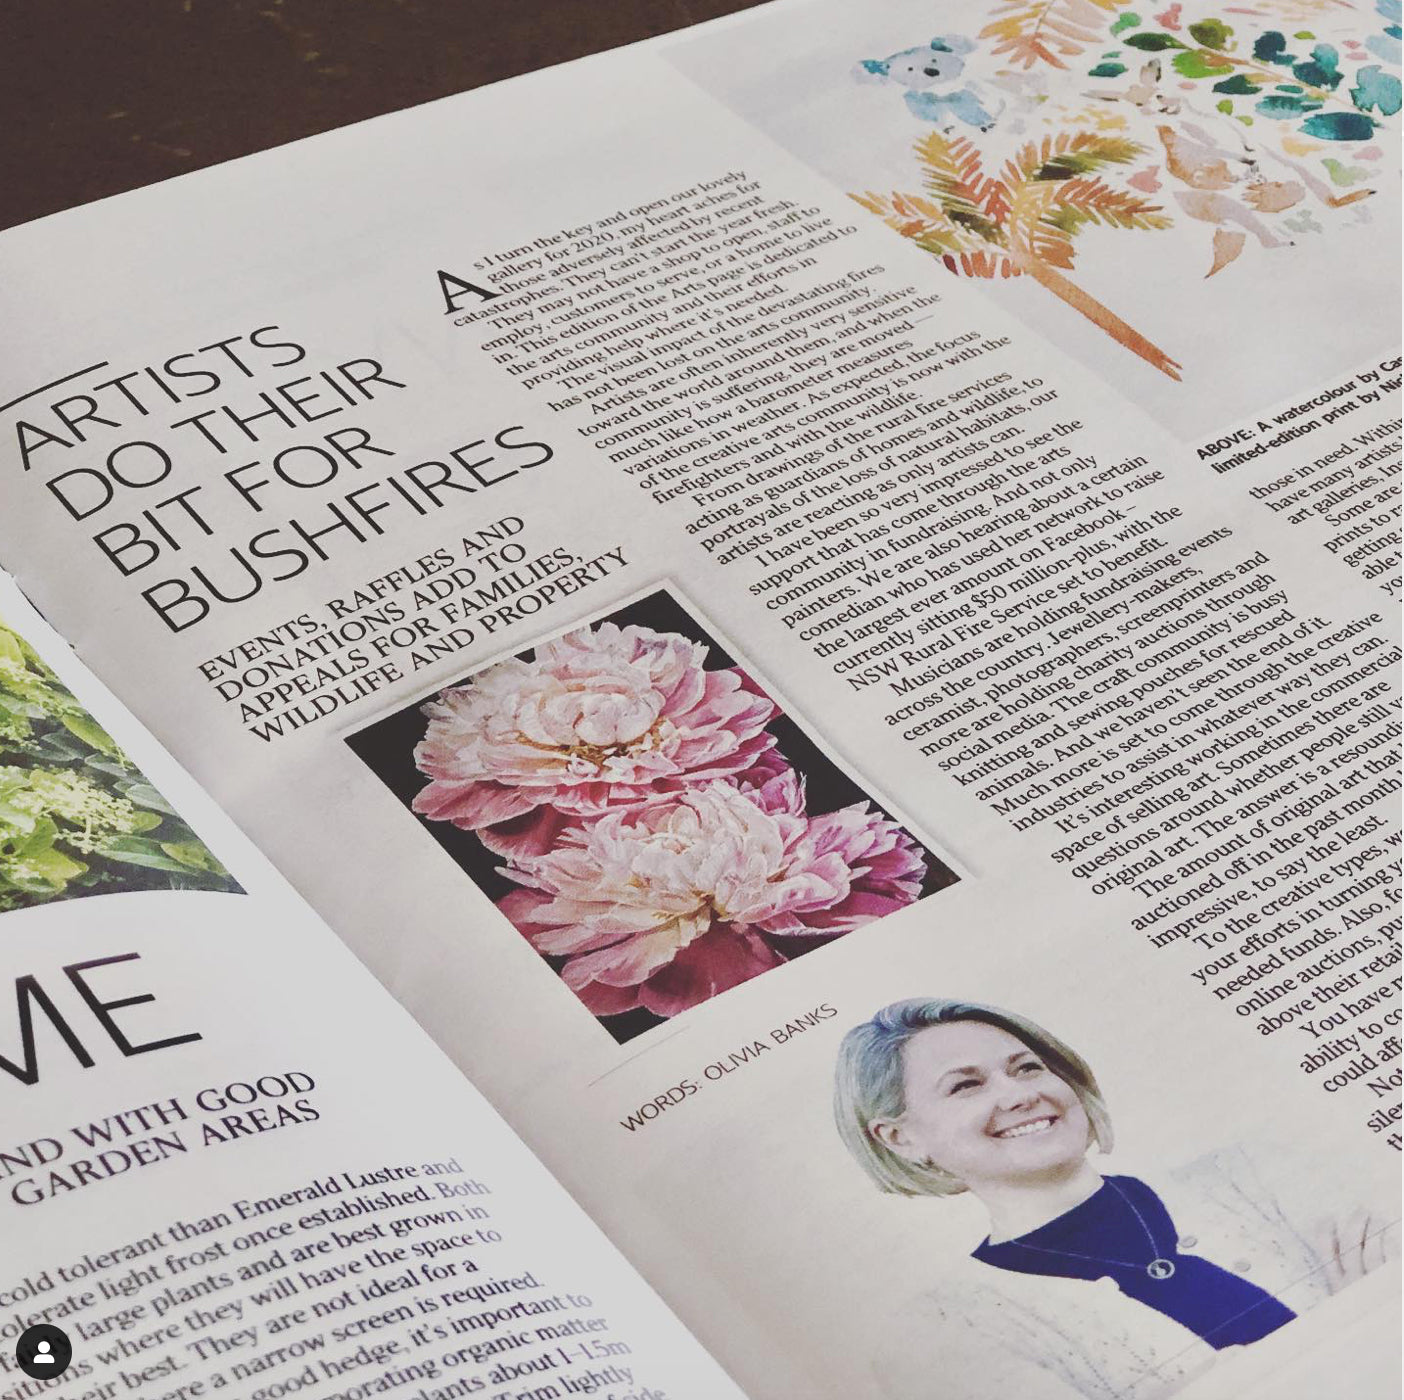 Art Nuvo Gallery Owner Oliva Banks article on Artists Do Their Bit For Bushfires featuring Nicole's Peonie In Bloom Print 